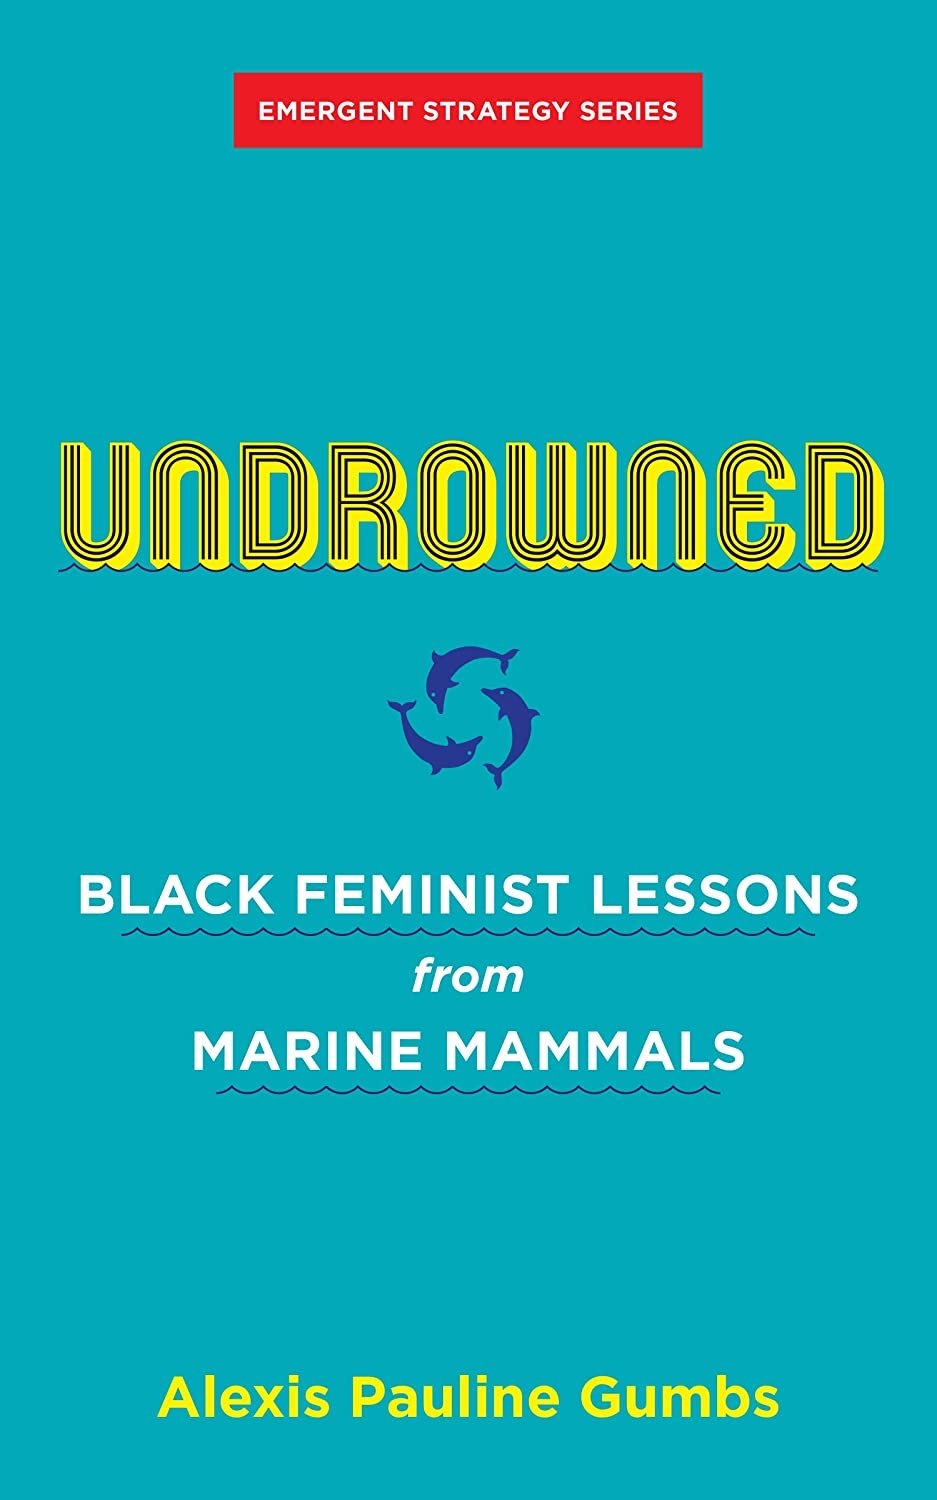 Book cover of Undrowned, black feminist lessons from marine mammals by Alexis Pauline Gumbs.